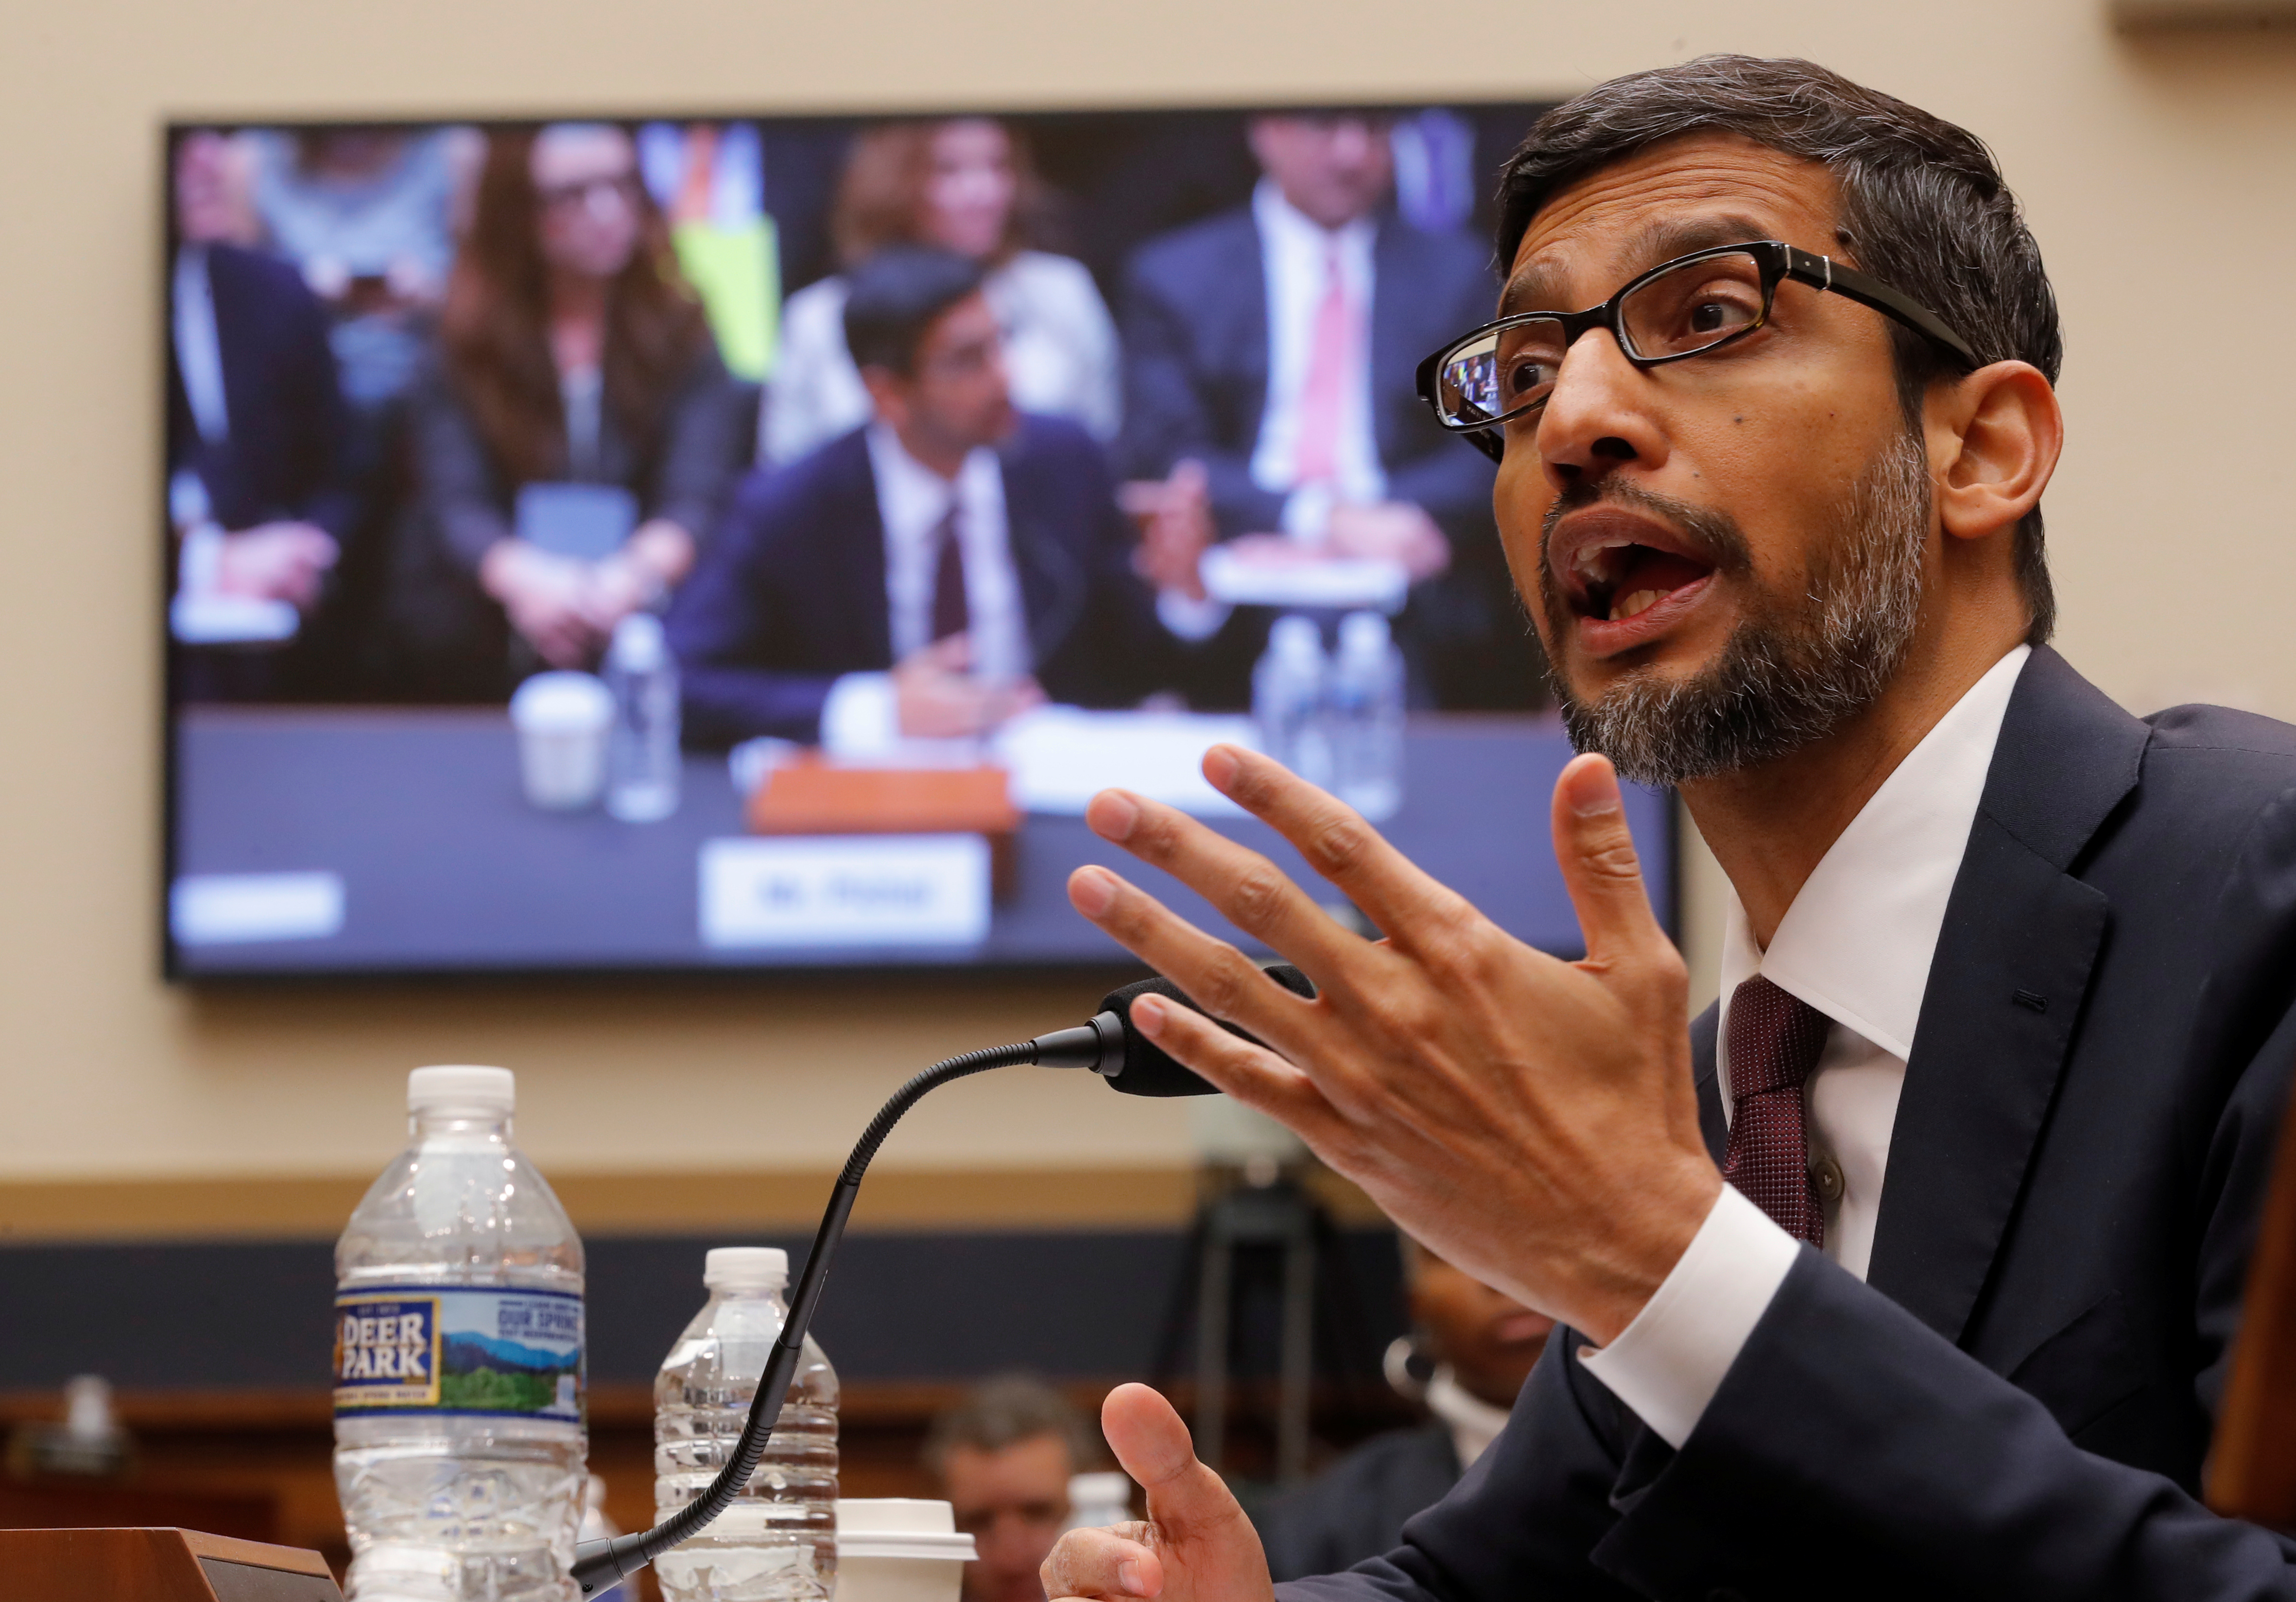 Google CEO Sundar Pichai testifies at a House Judiciary Committee hearing "examining Google and its Data Collection, Use and Filtering Practices" on Capitol Hill in Washington, U.S., December 11, 2018. REUTERS/Jim Young